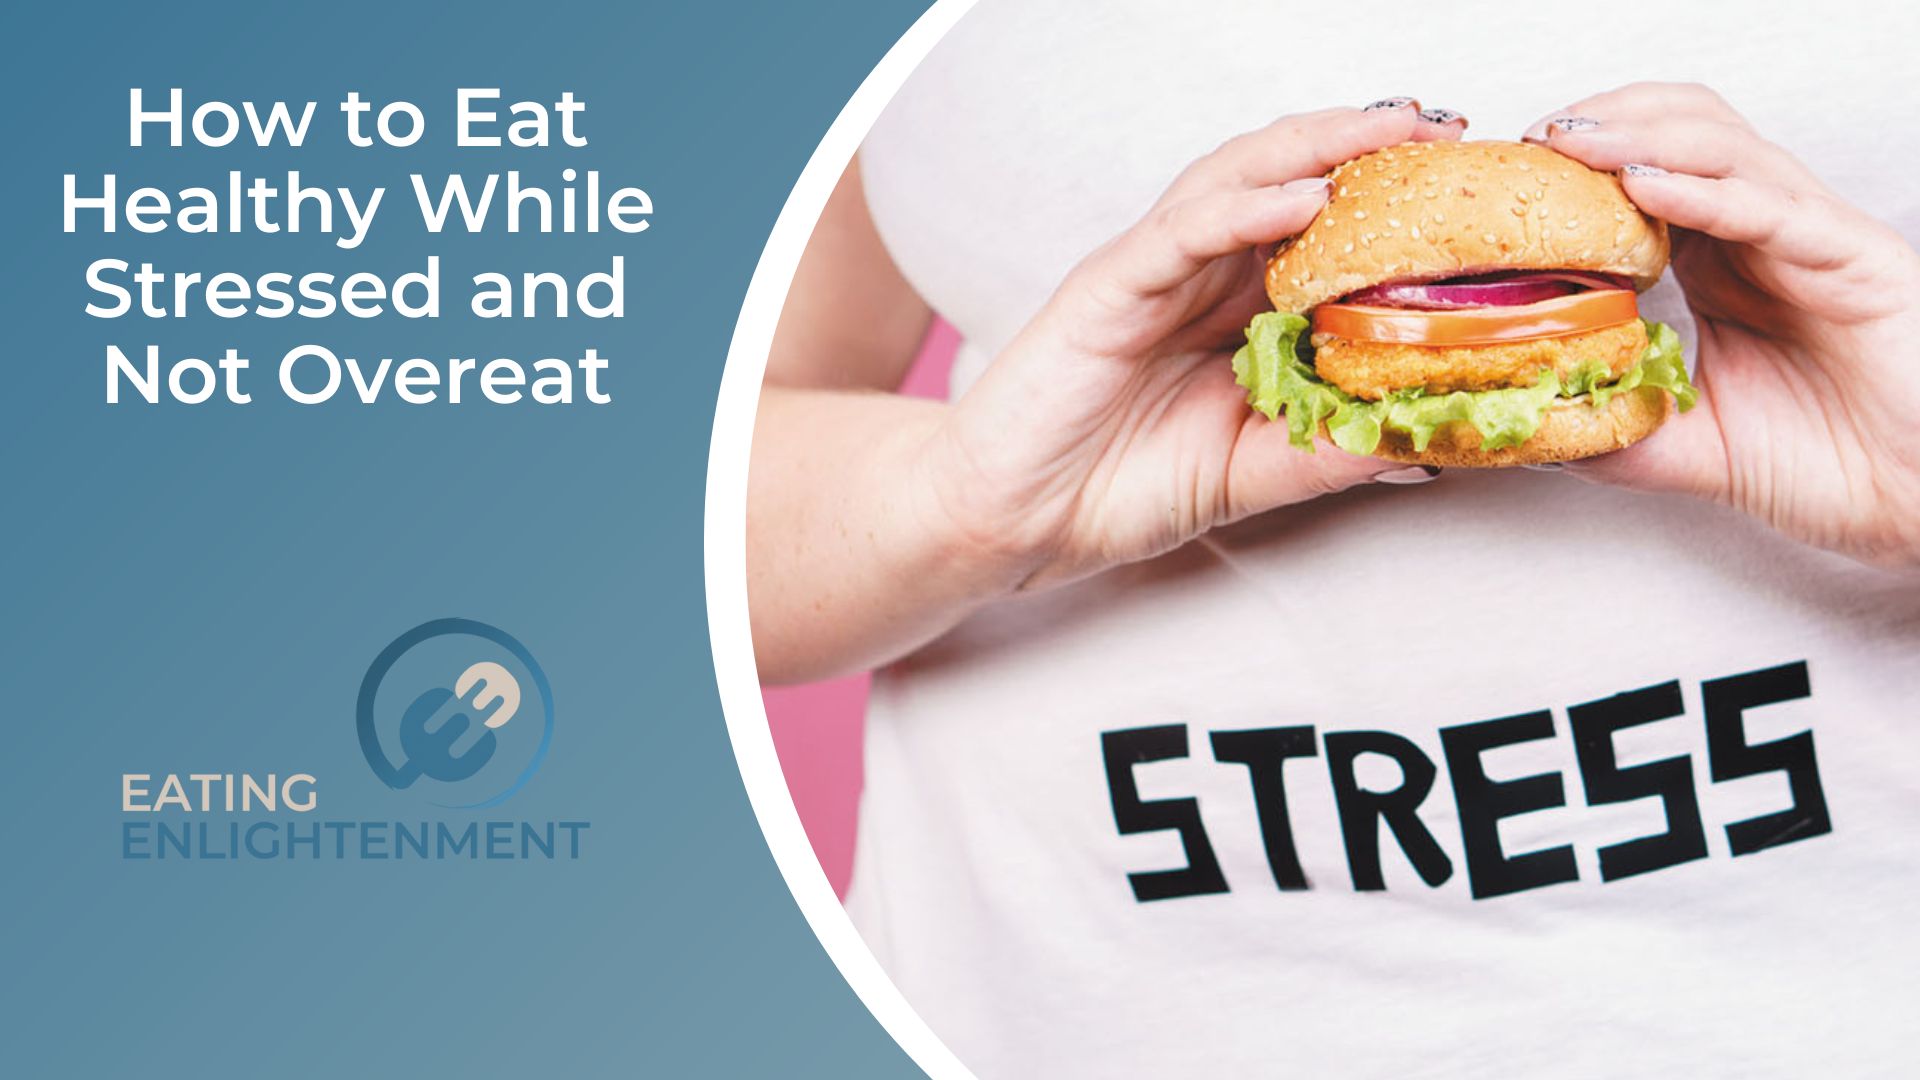 How to Eat Healthy While Stressed and Not Overeat